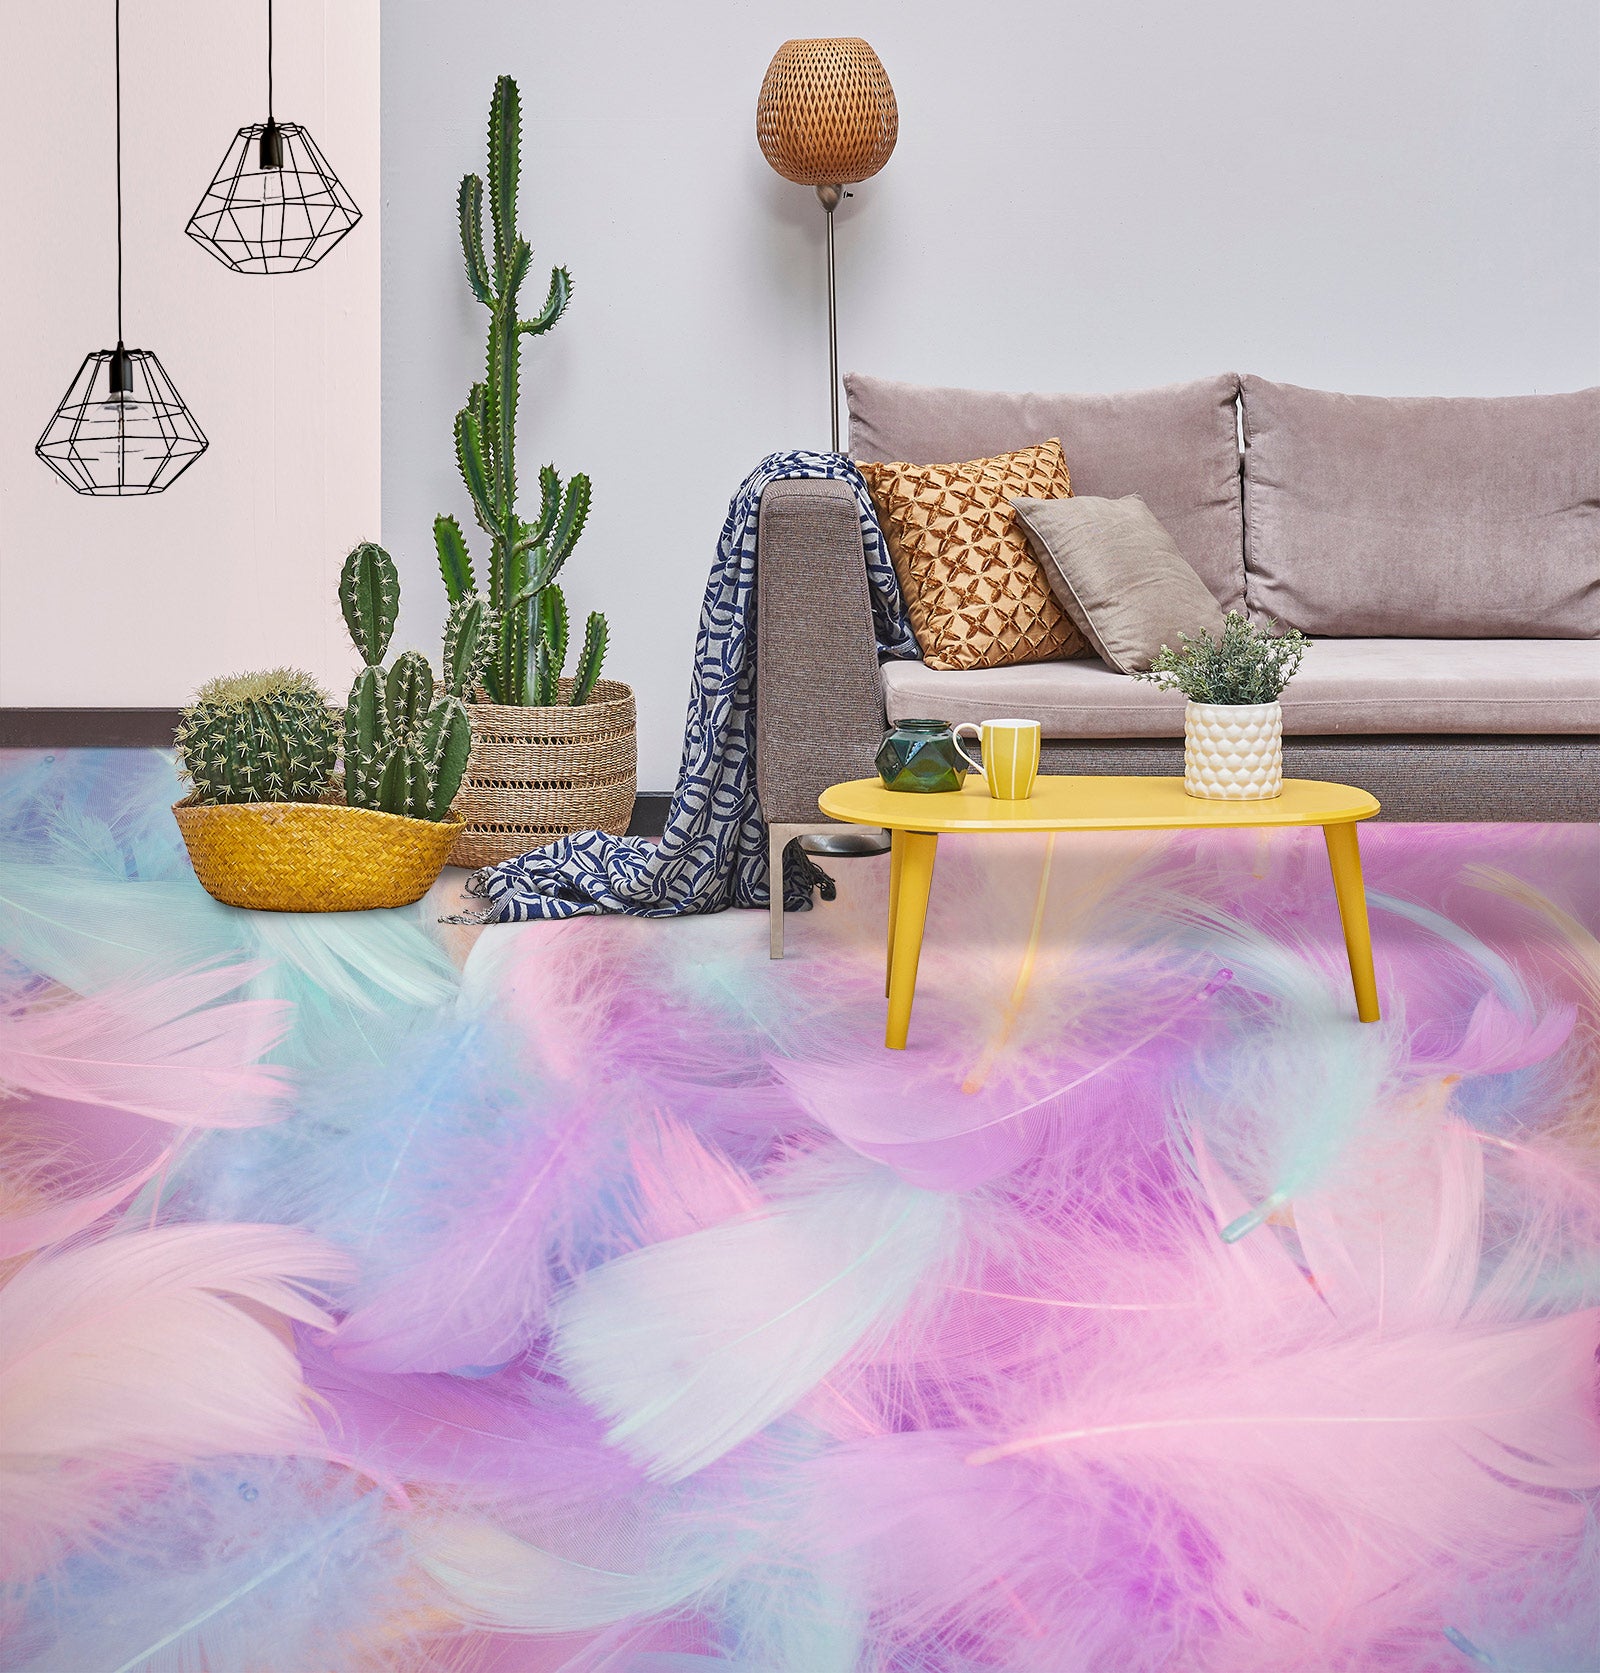 3D Sweet Feathers 1132 Floor Mural  Wallpaper Murals Self-Adhesive Removable Print Epoxy